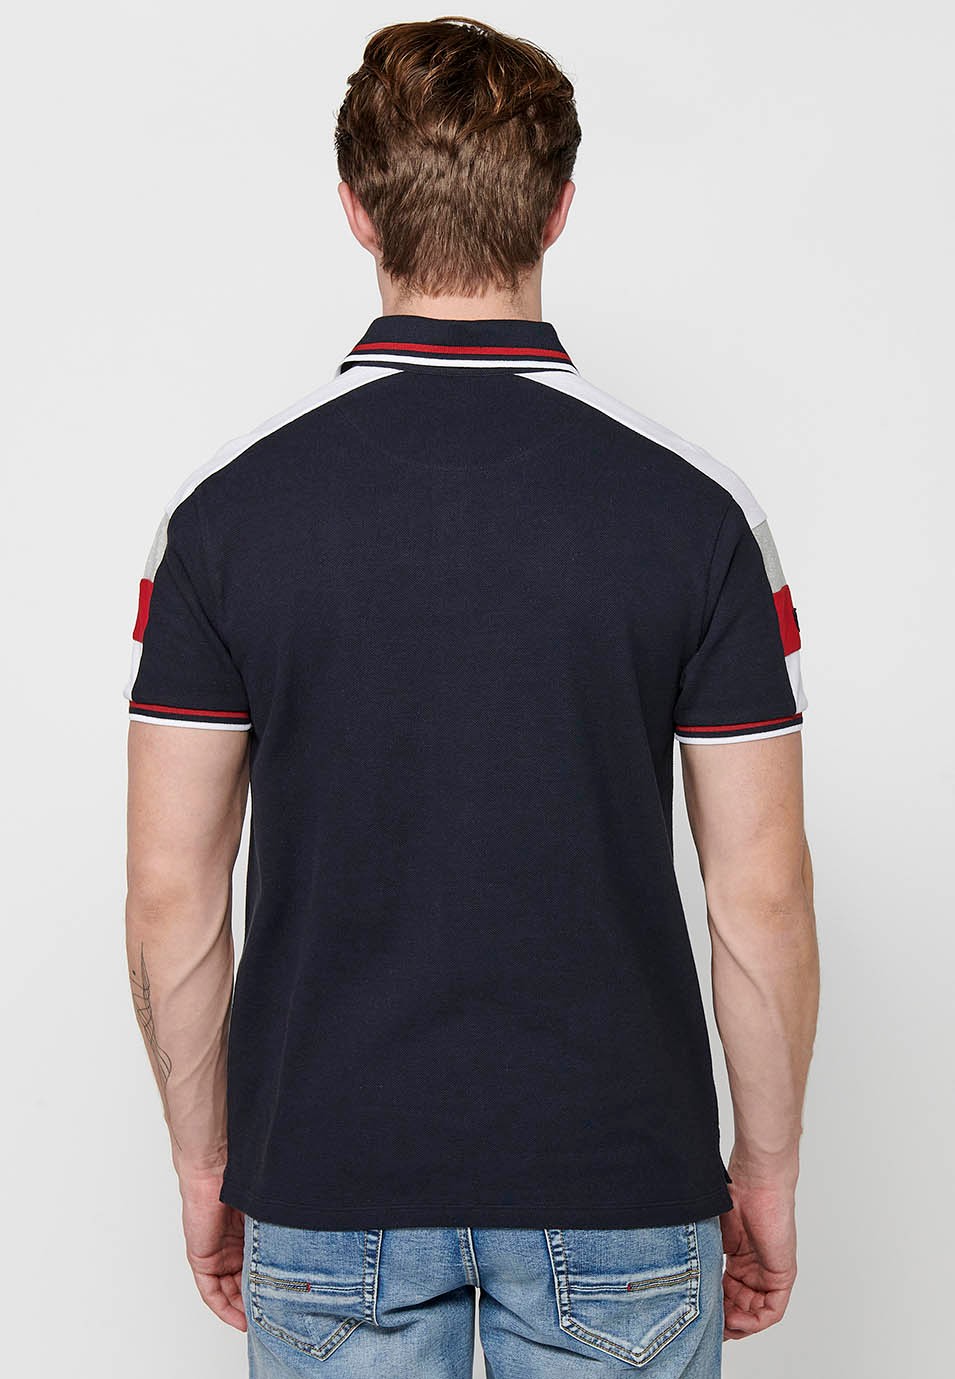 Short-sleeved cotton polo shirt with buttoned shirt collar and front detail with sleeves finished in rib and finished with side slits in Navy Color for Men 6